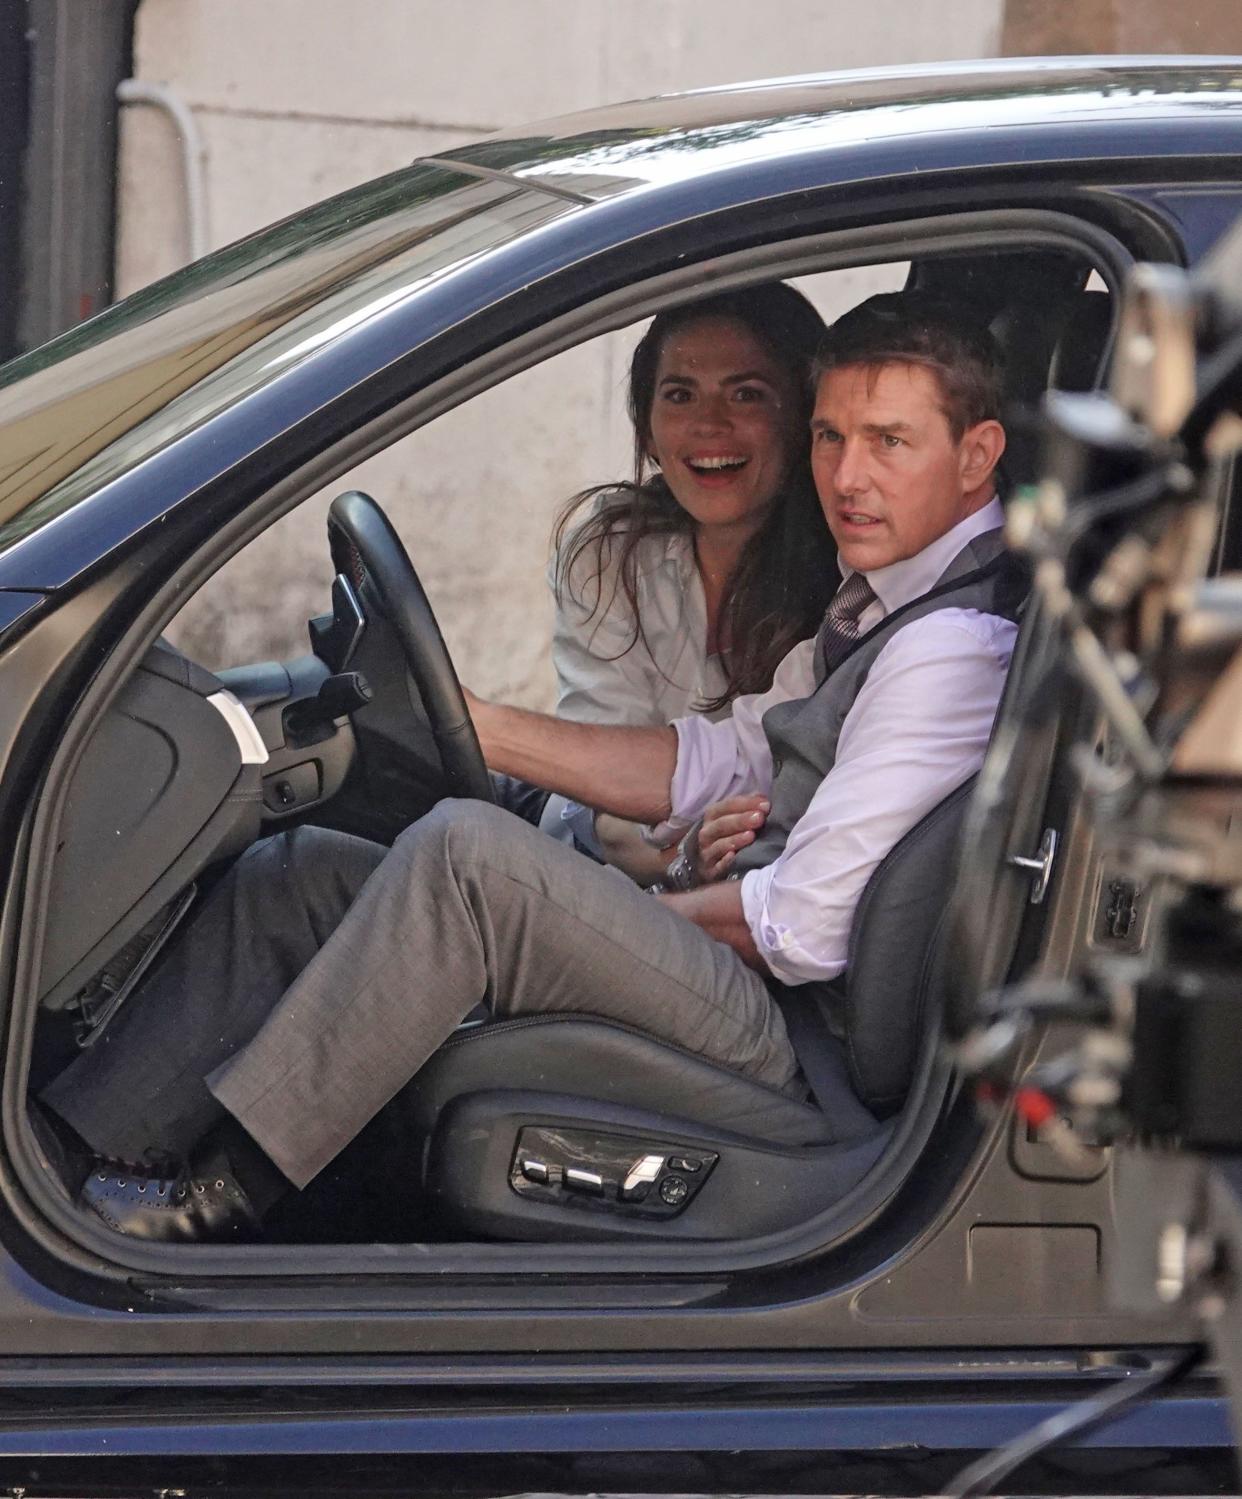 Hollywood action star Tom Cruise and Hayley Atwell are spotted on the set of "Mission: Impossible 7" filming in Rome, Italy on Oct. 6, 2020.